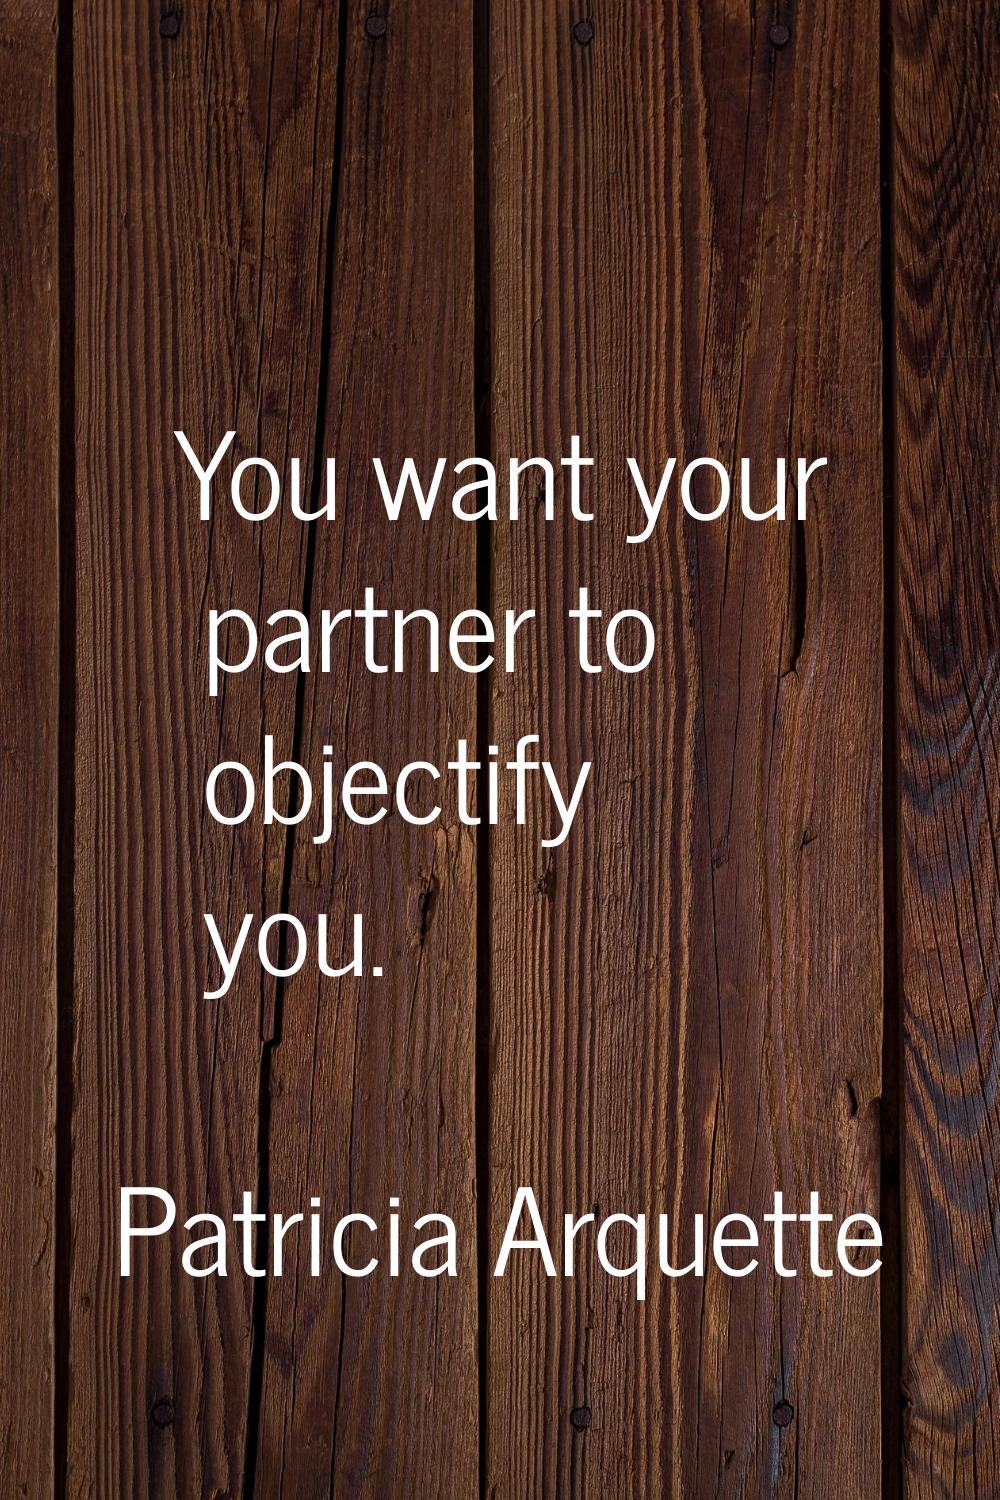 You want your partner to objectify you.